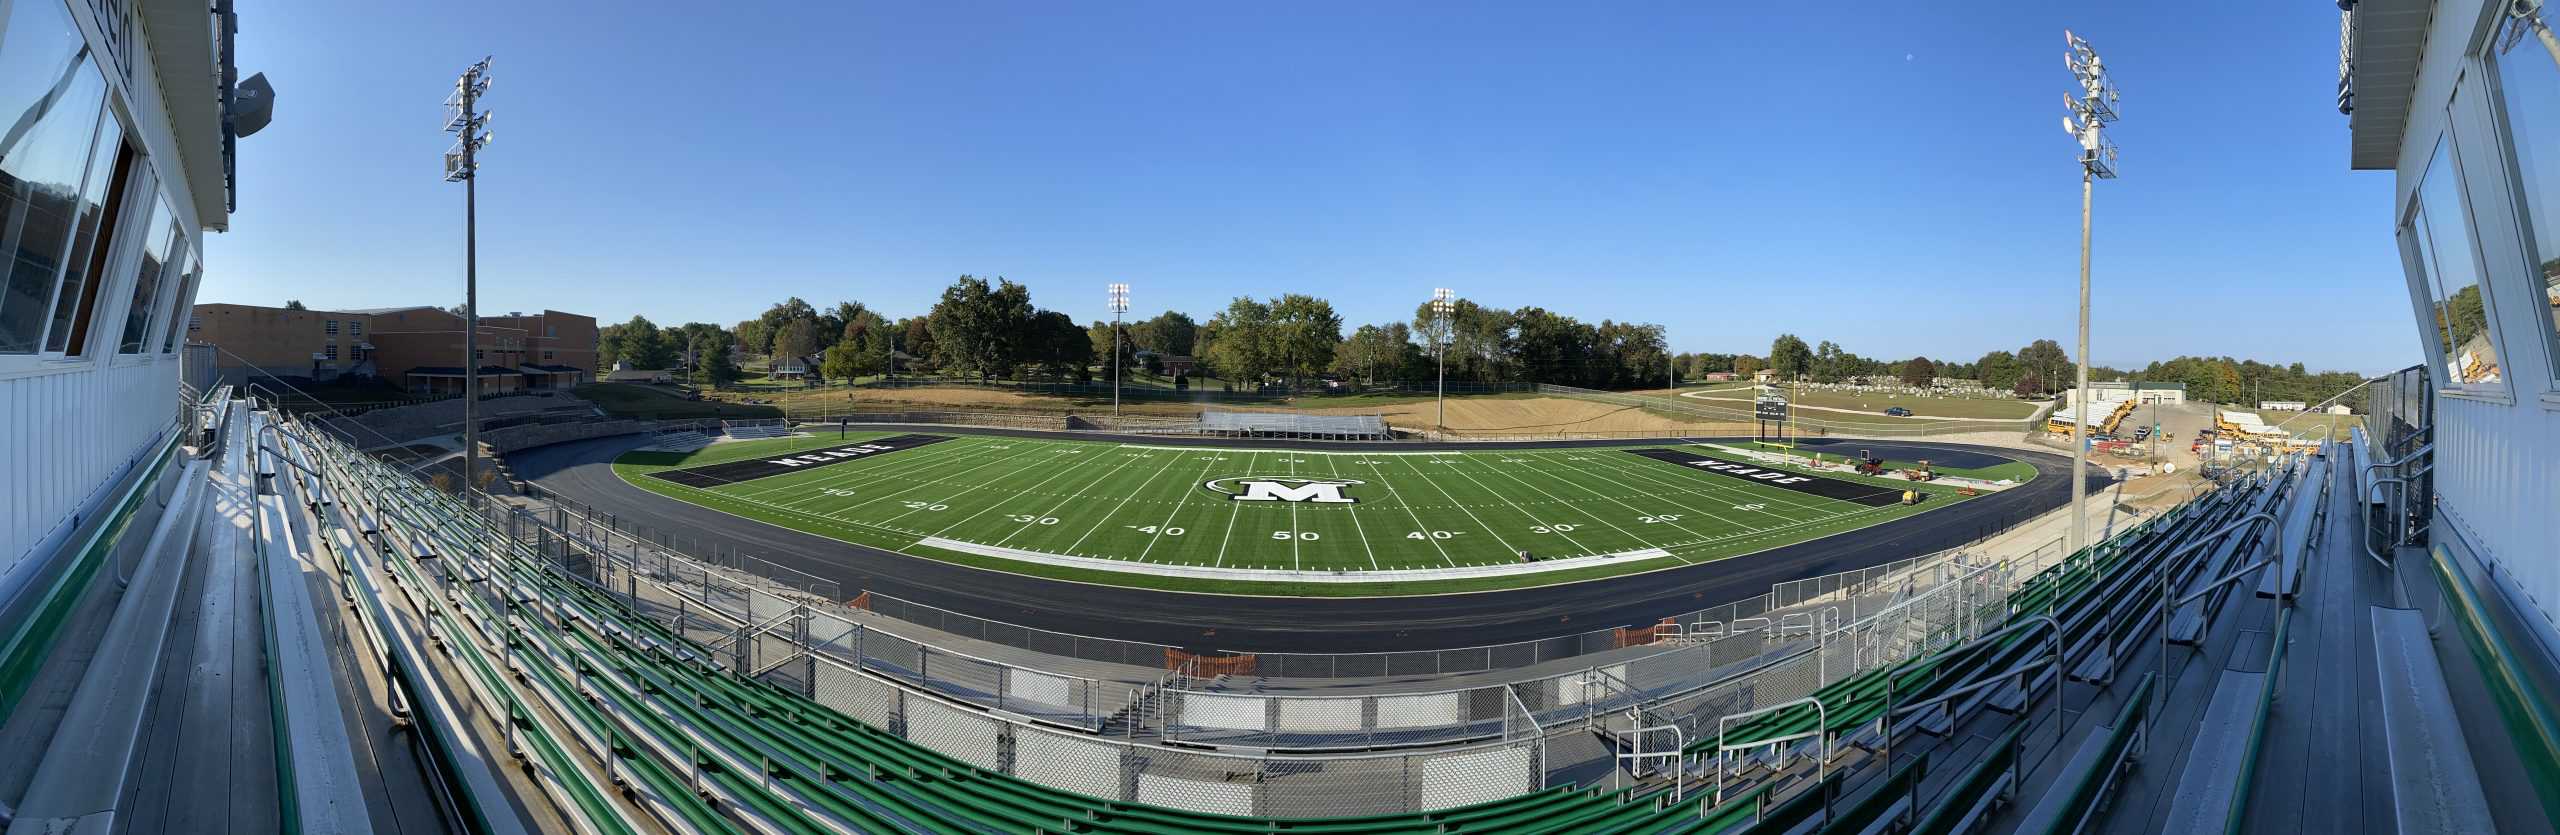 Meade County High School Athletic Complex